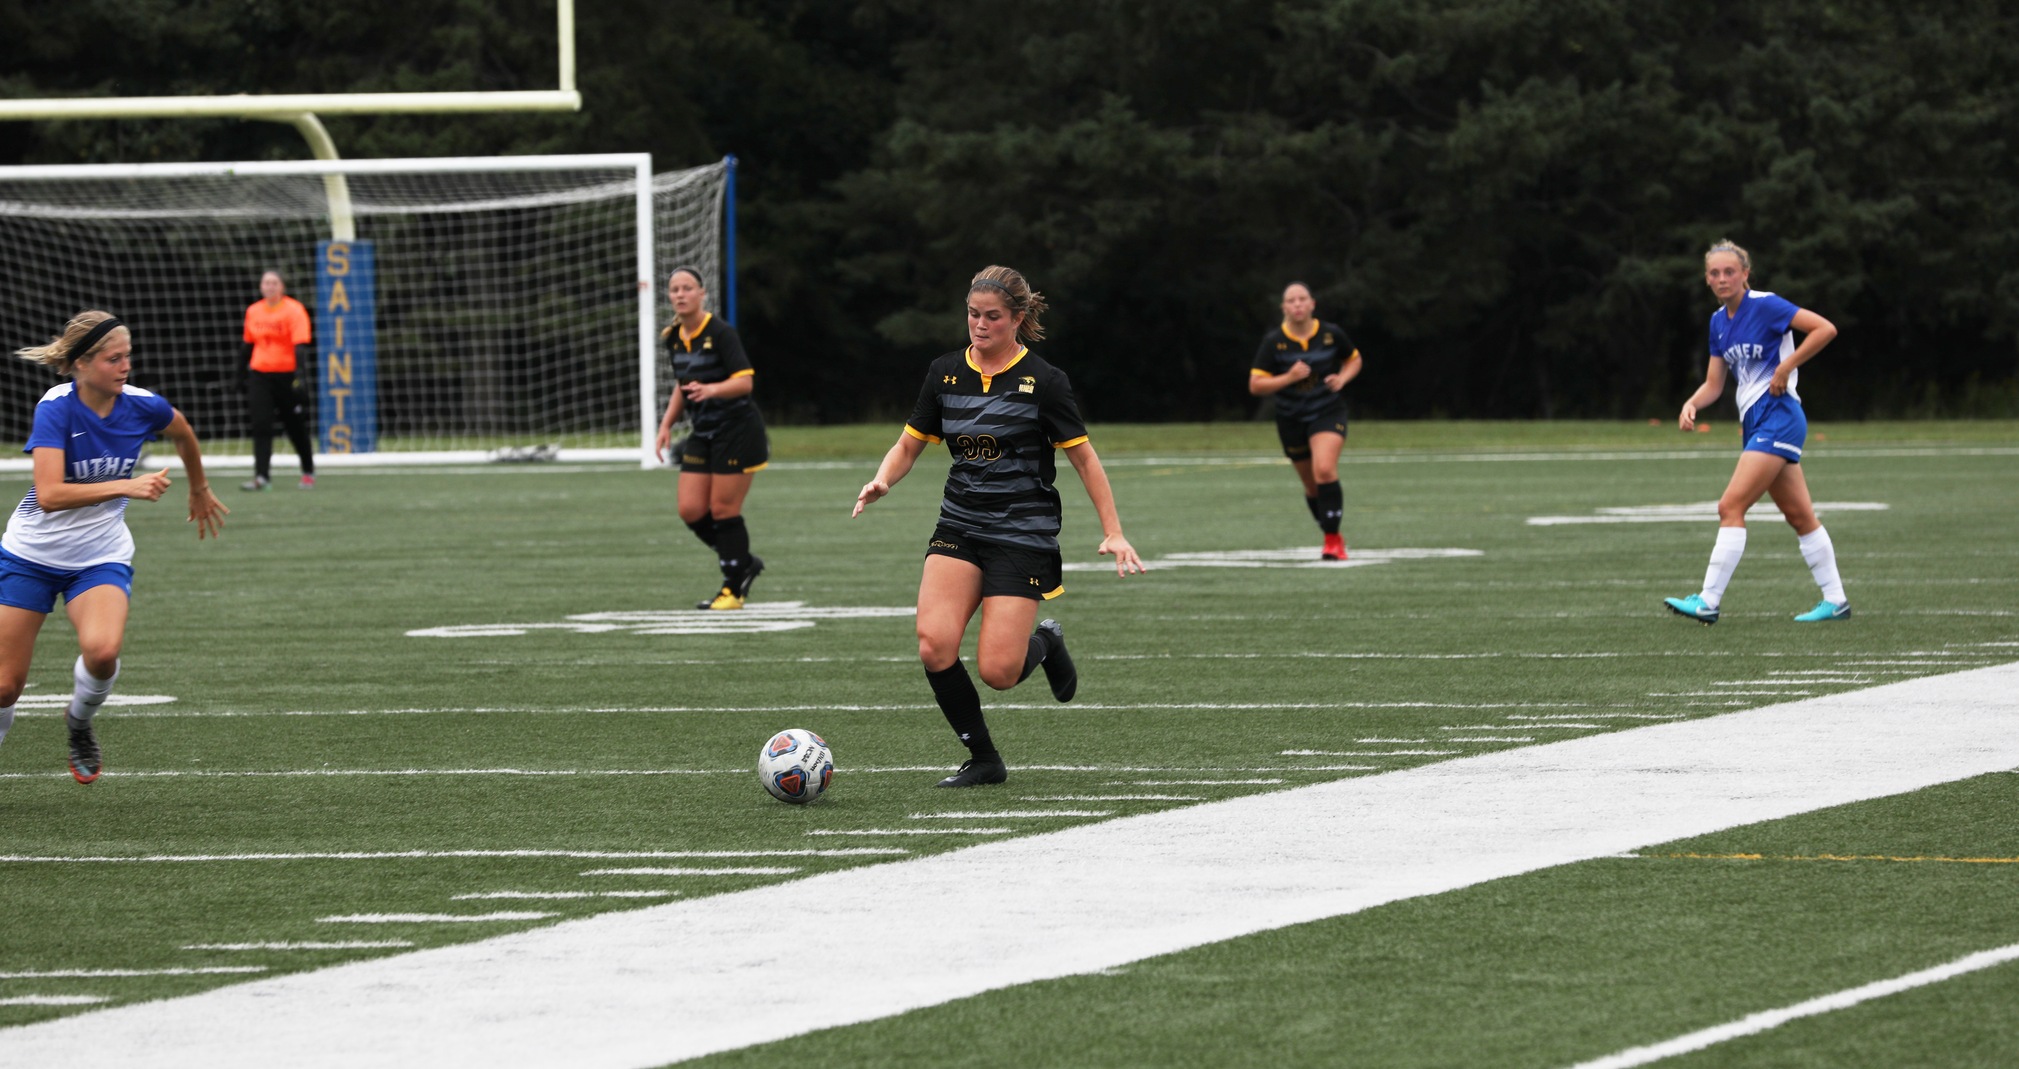 Mary Schmidt had two of the Titans' 10 shots on goal against the Saints.